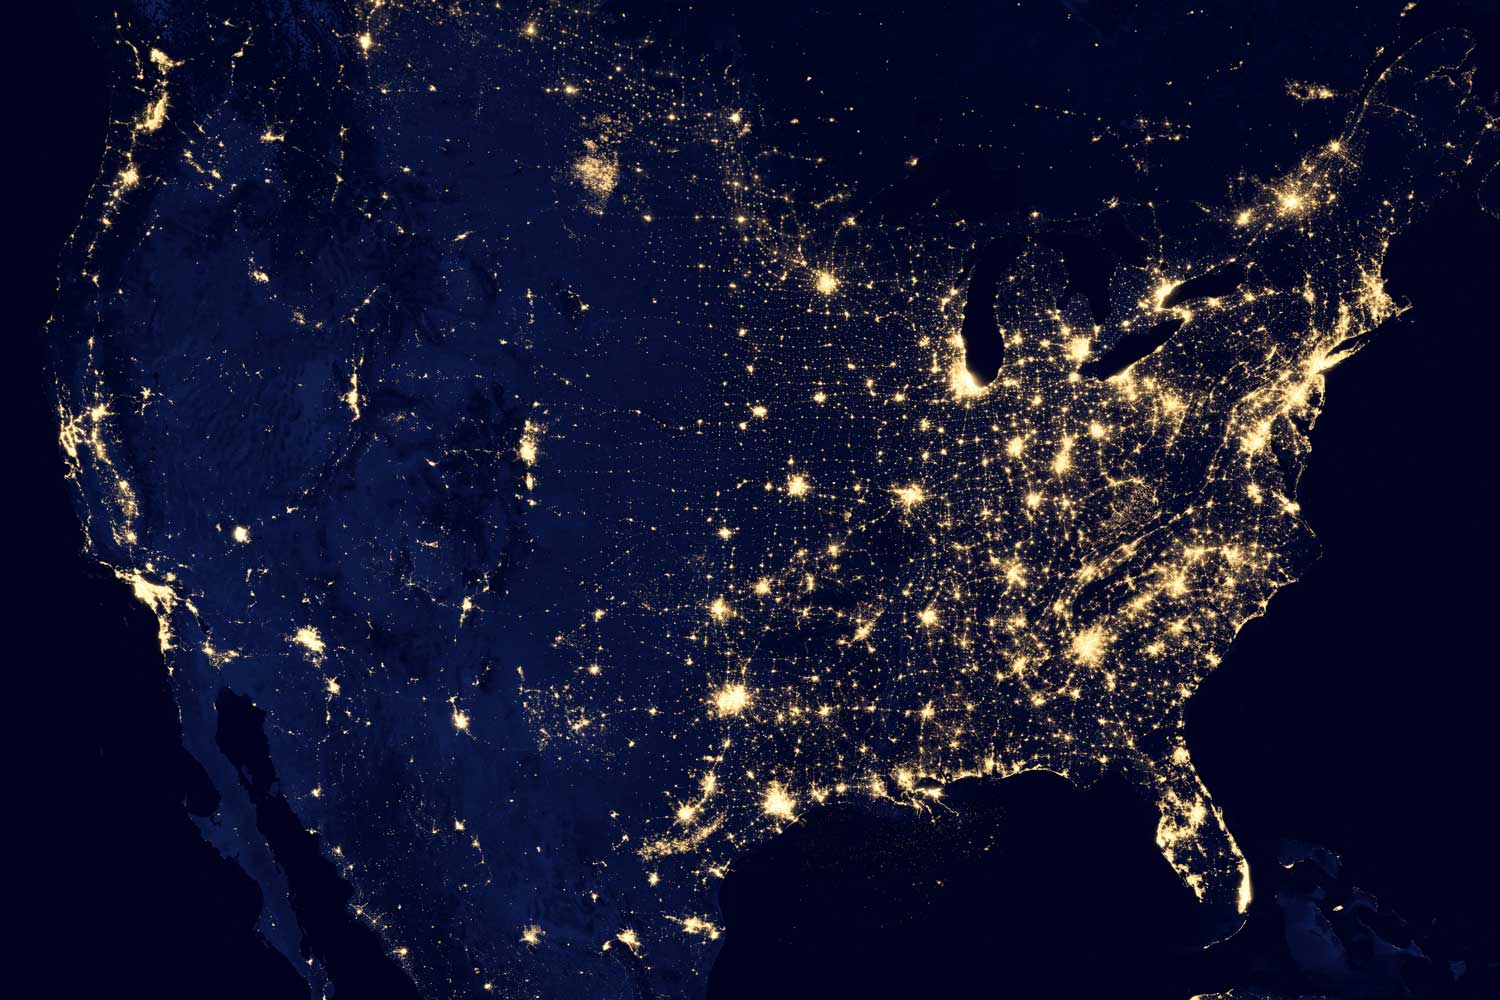 Photograph of city lights in America from space.